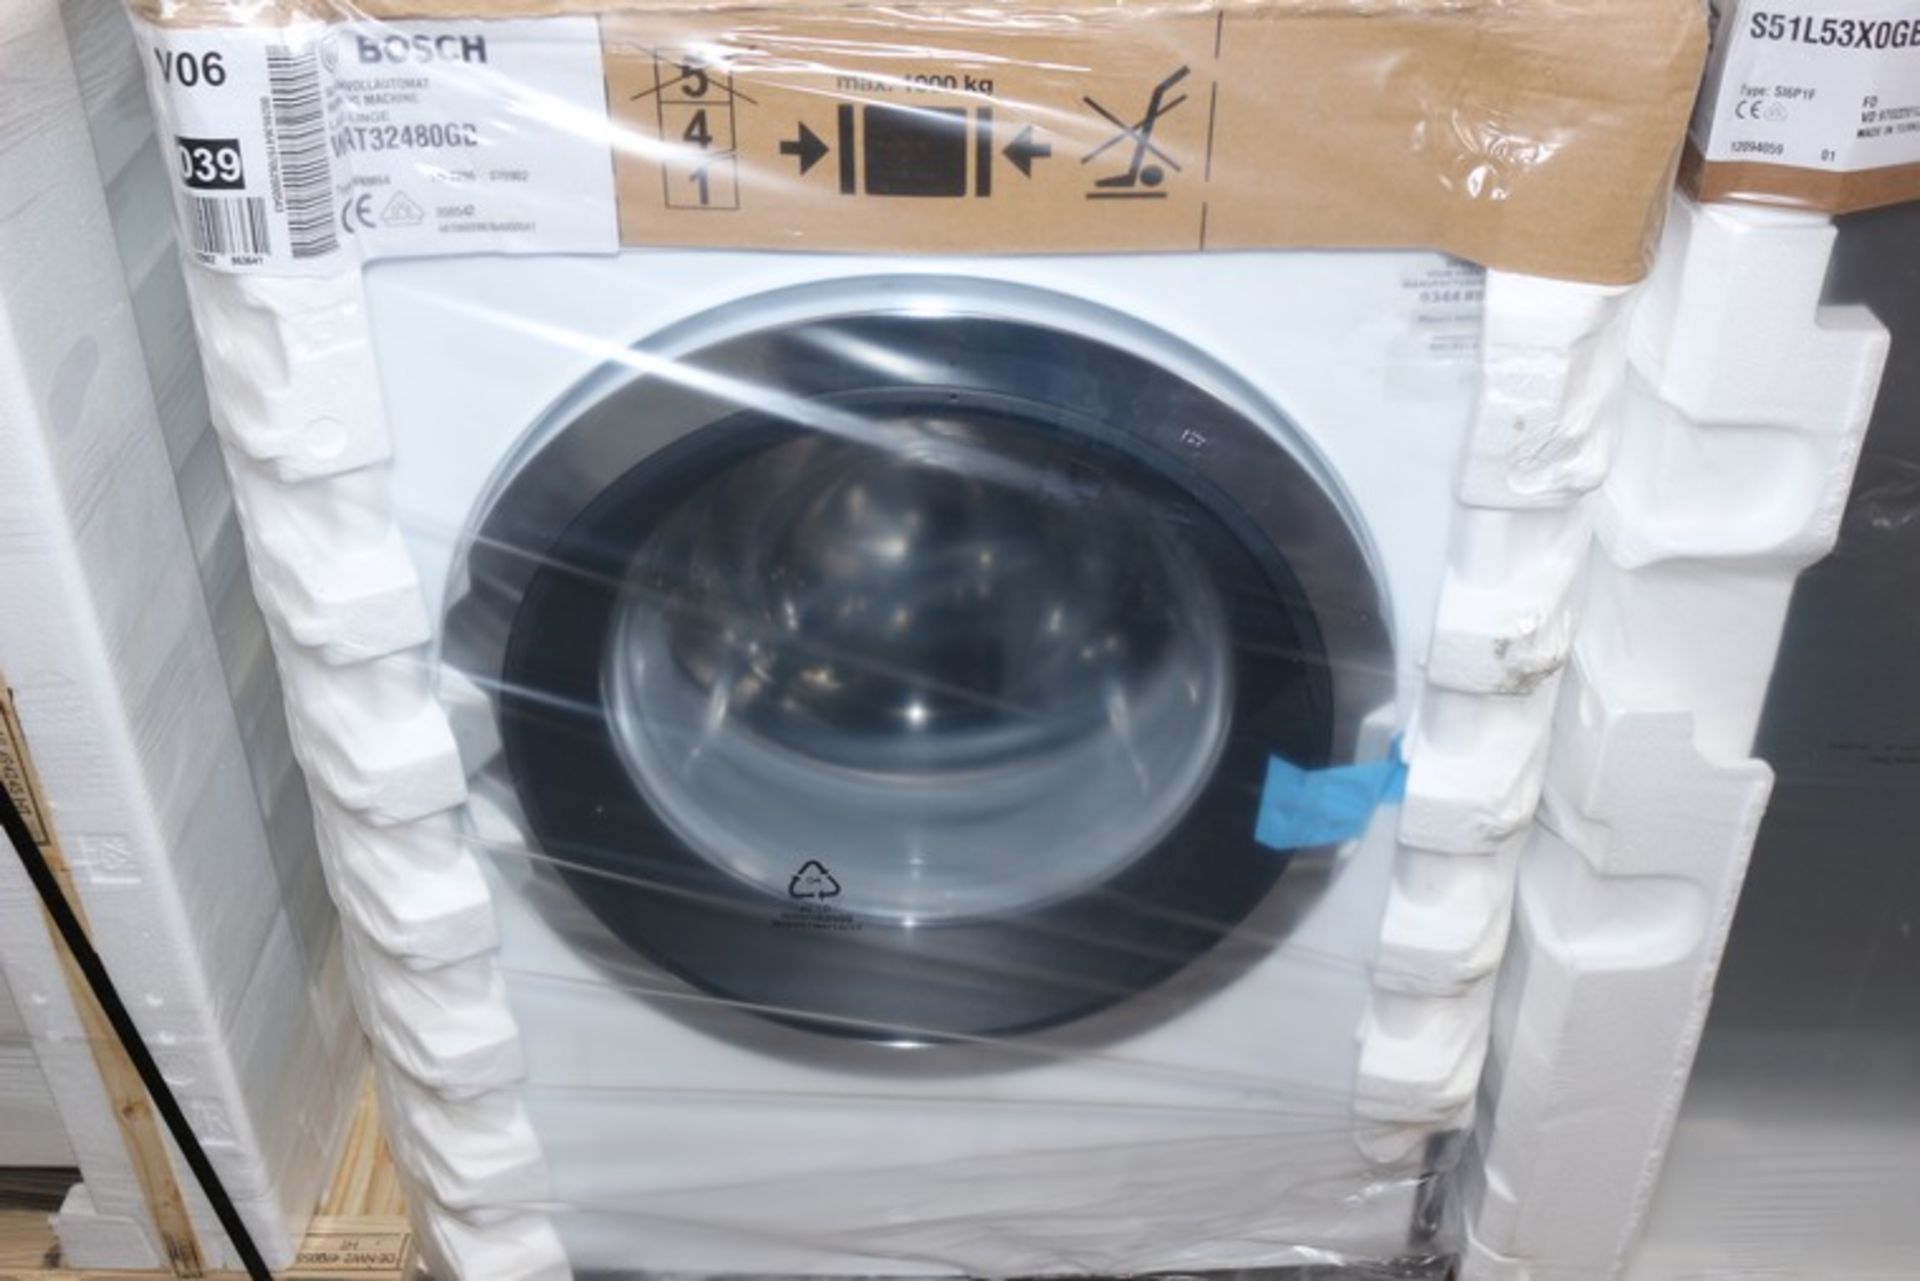 1 x BOXED BOSCH WAT3248GB FREE STANDING WASHING MACHINE 9KG AAA RATED RRP £620 (4.7.17) *PLEASE NOTE